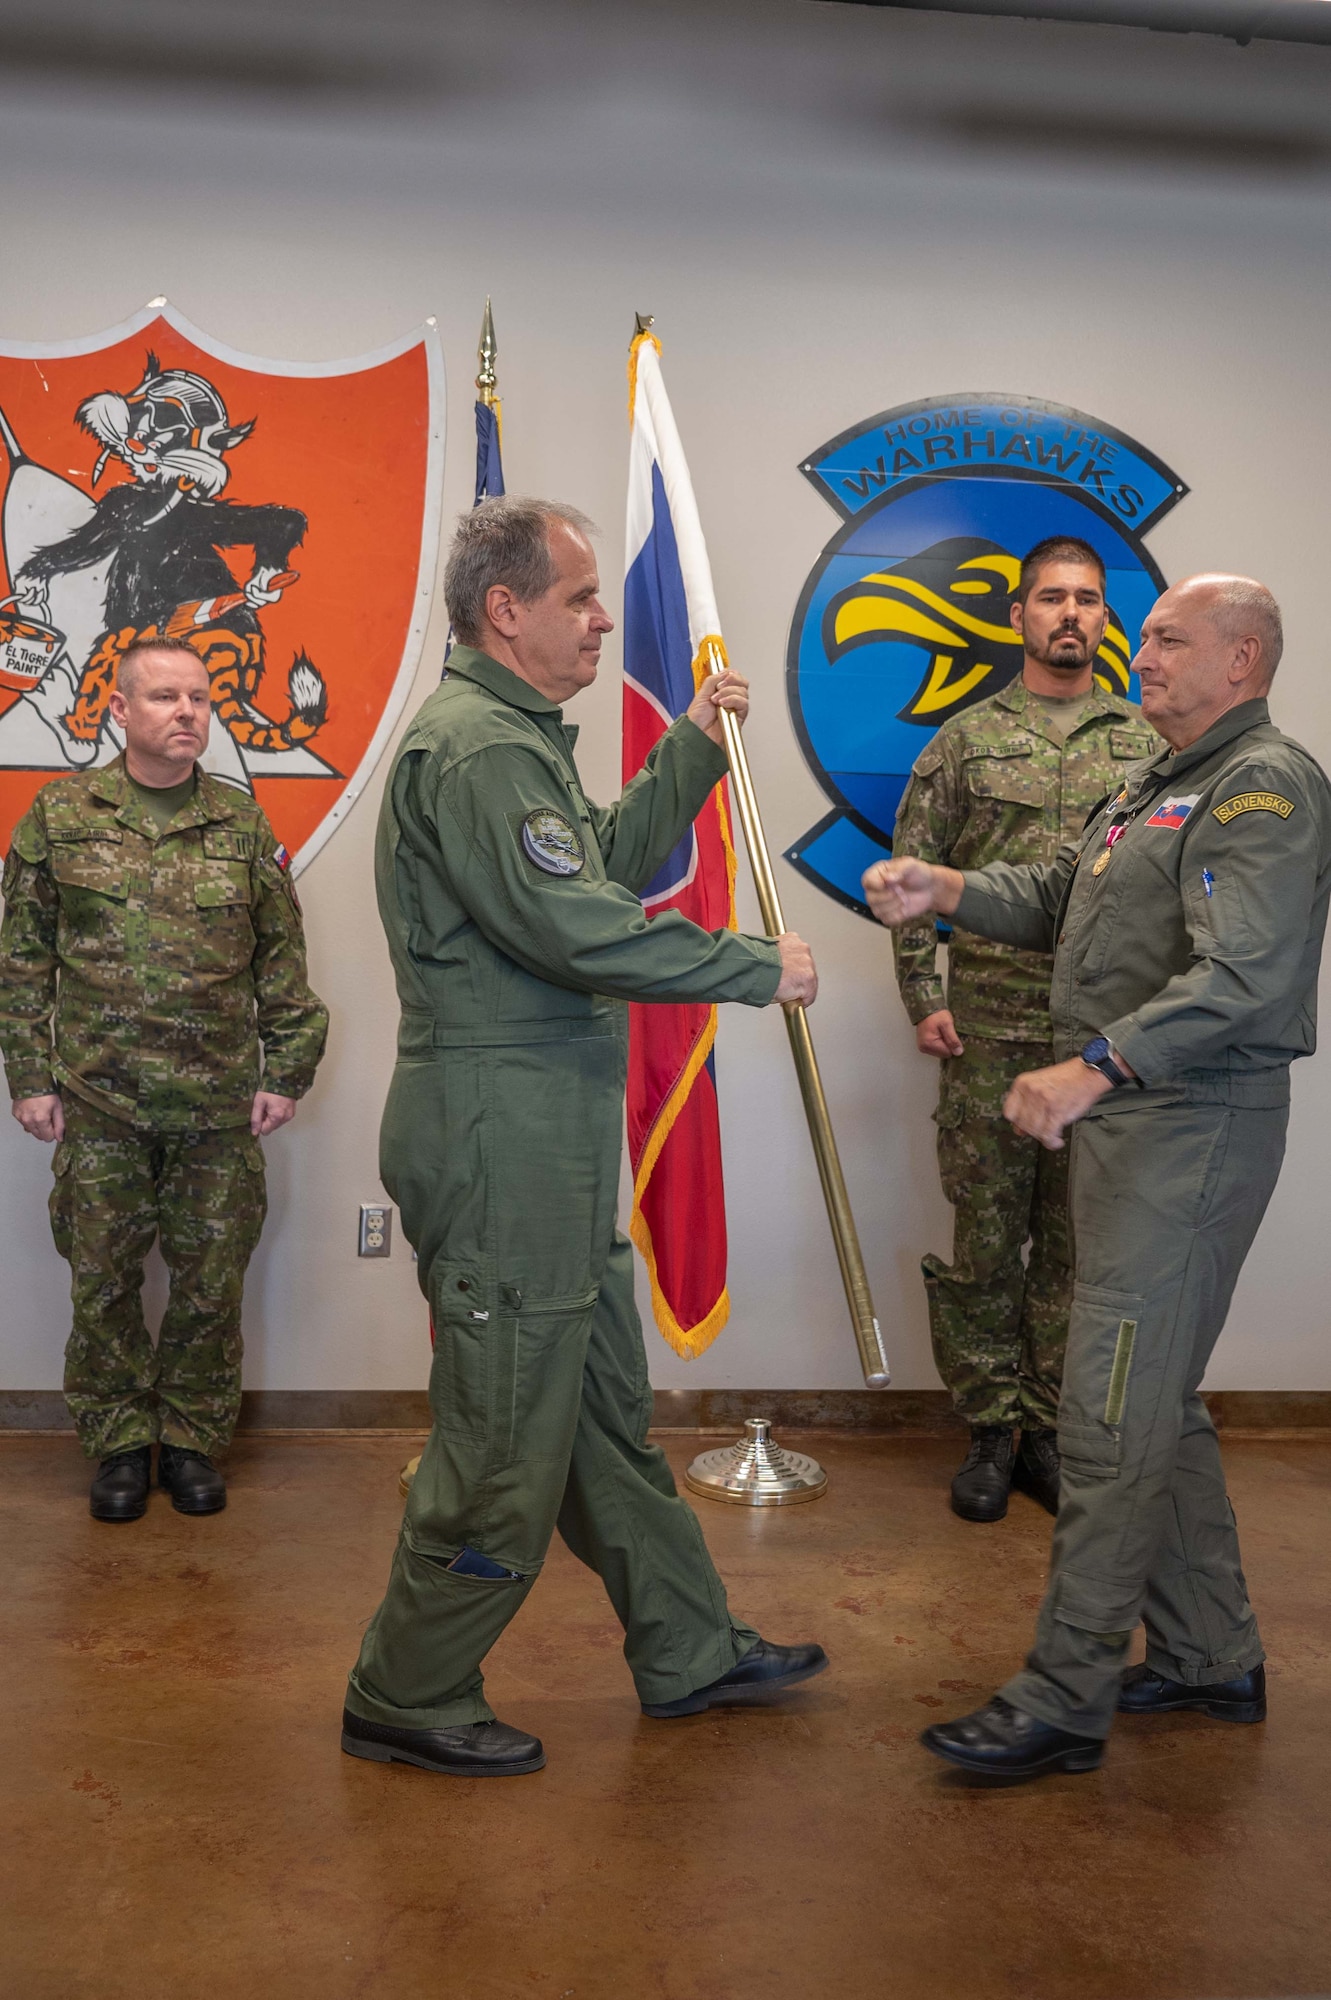 Slovak air force Colonel Adolf Ulicny receives the Slovakian flag from Colonel Tomas Novotny as a symbol of his assumption of duties as the new Slovak Foreign Liaison Officer in a ceremony here today at Morris Air National Guard Base, Ariz. (U.S. Air National Guard photo by Maj. Angela Walz)